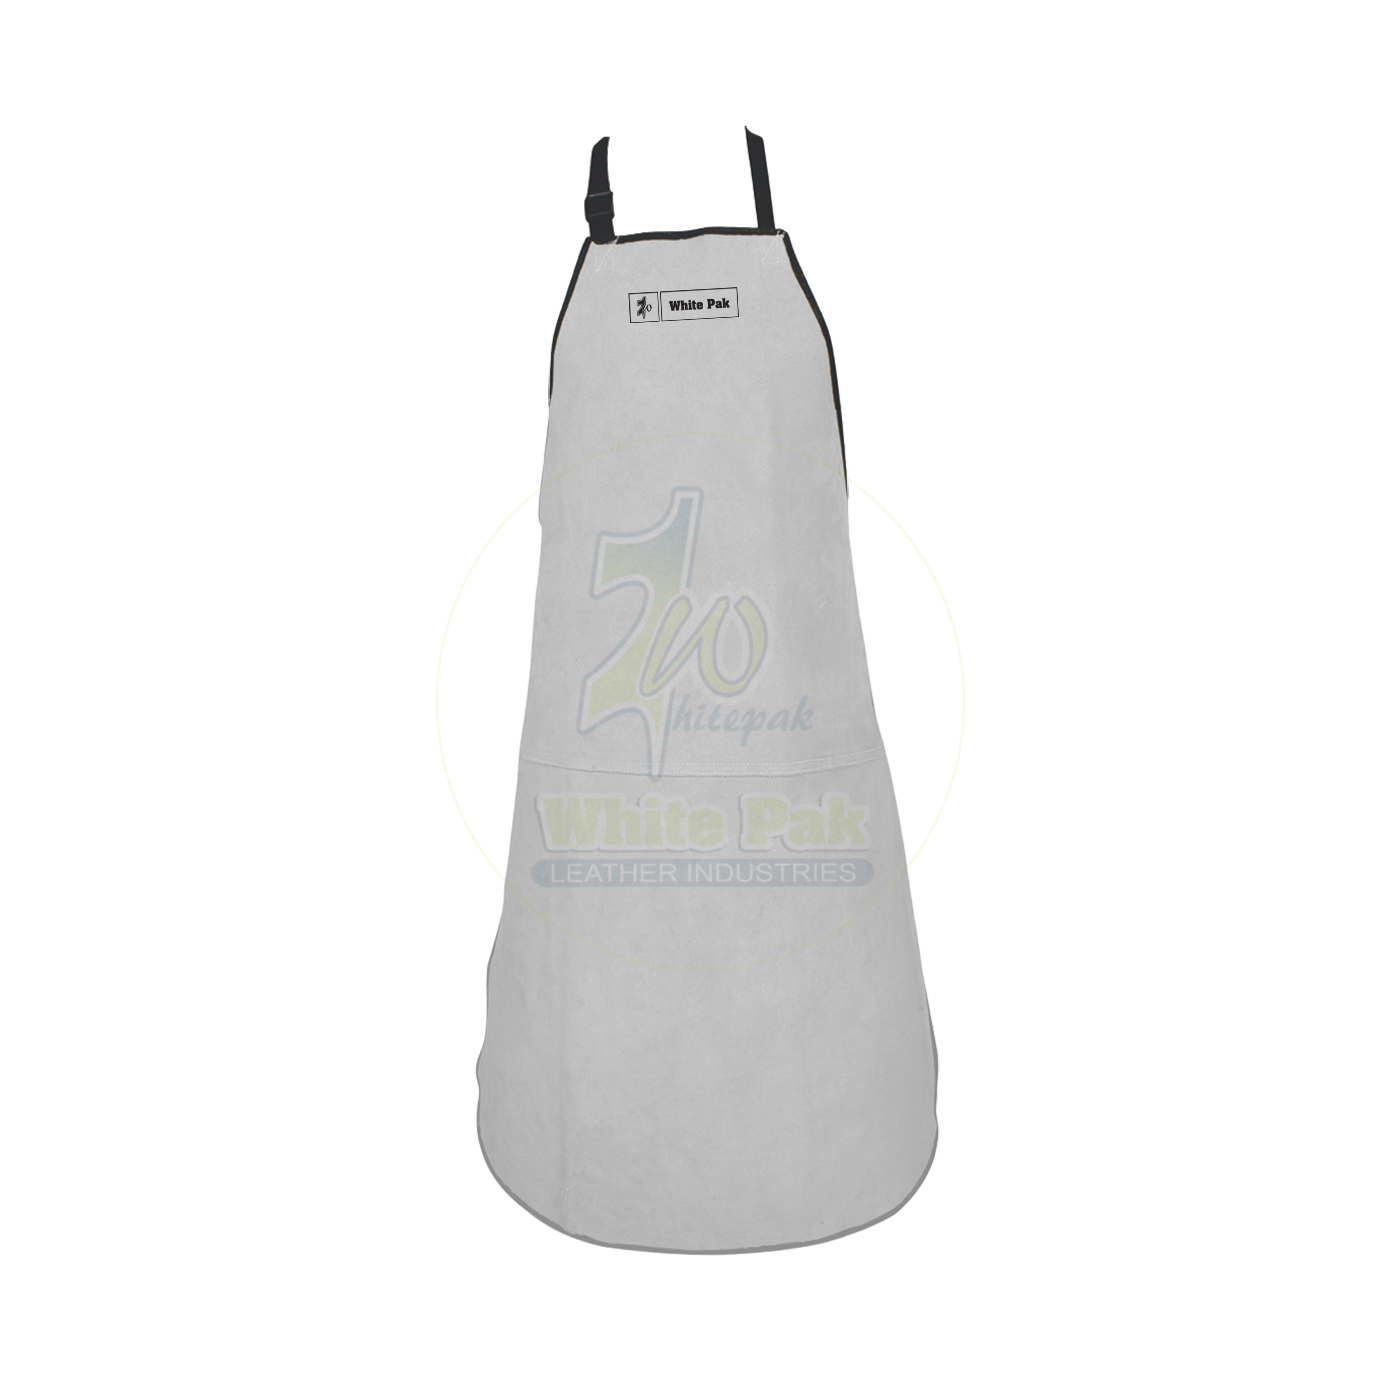 High Quality Welding Aprons